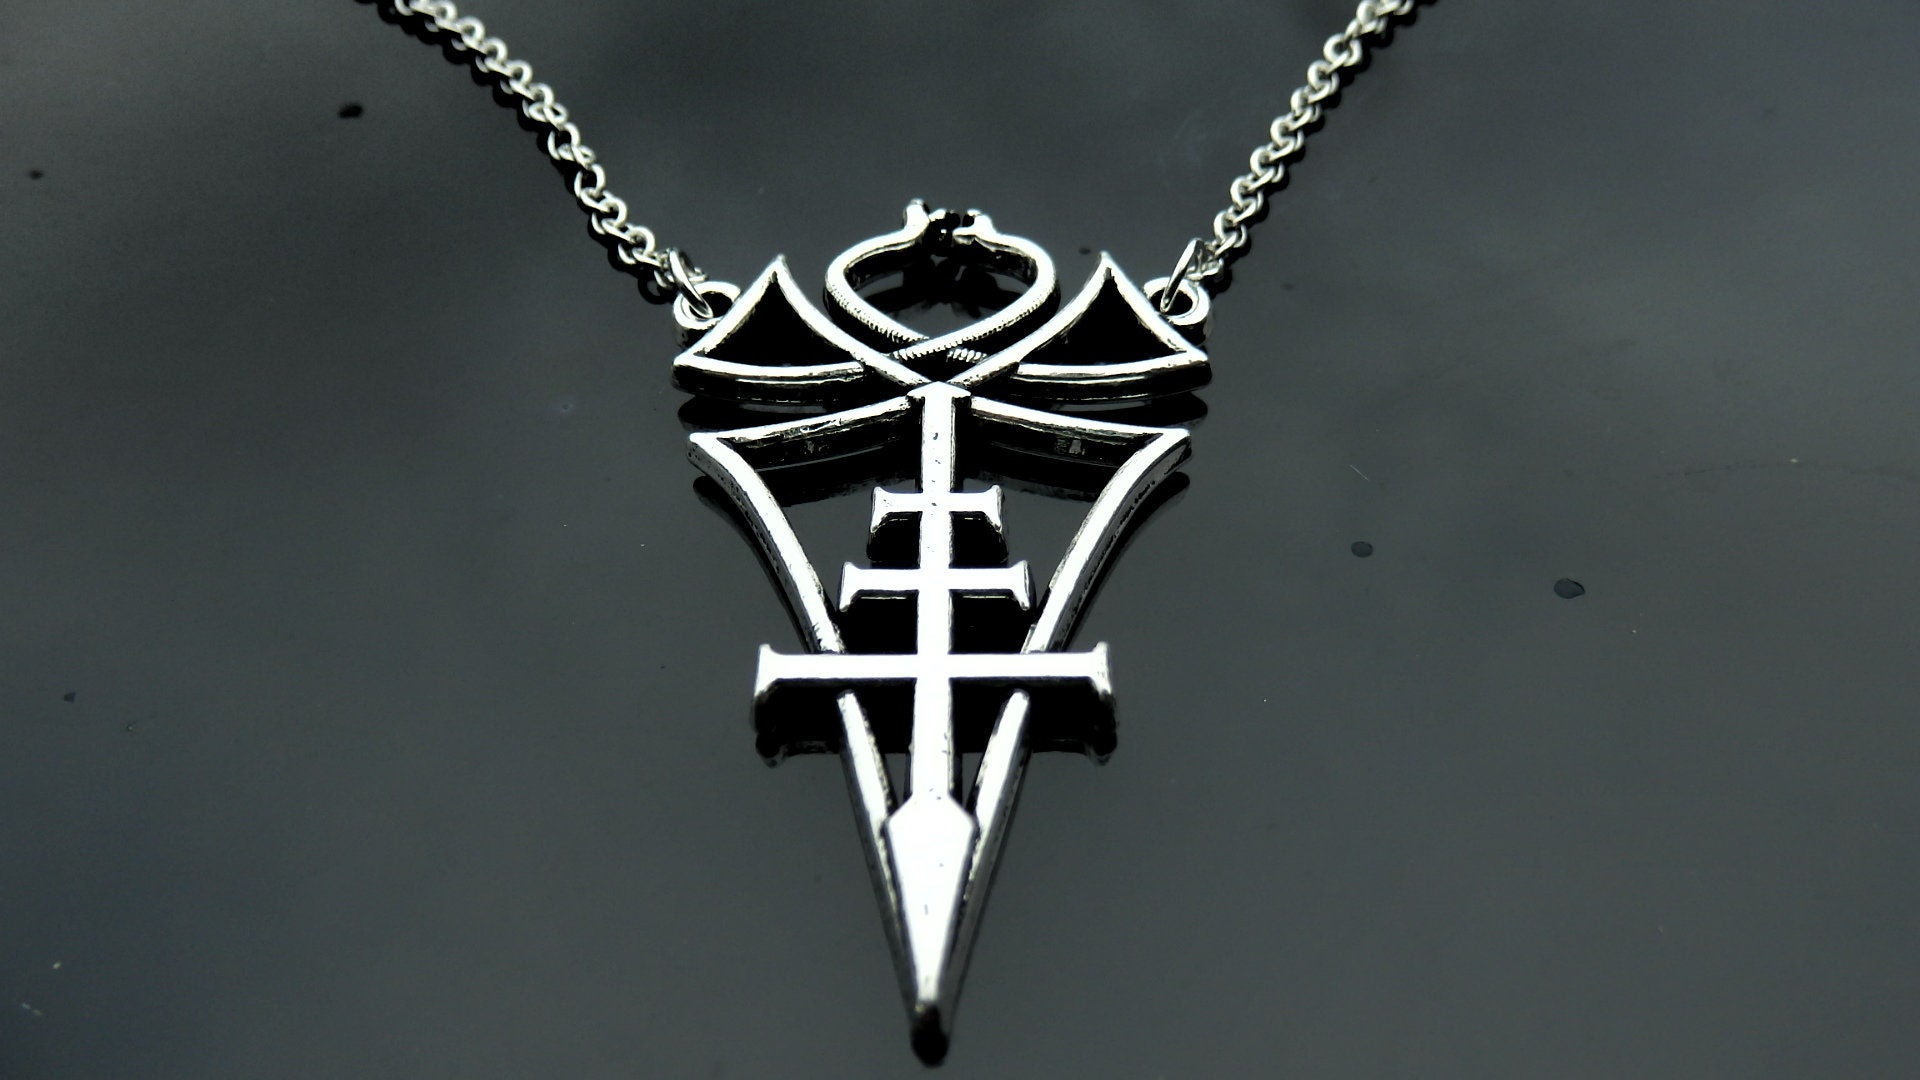 Unique Necklace of Belphegor's Official Sigil the - Etsy